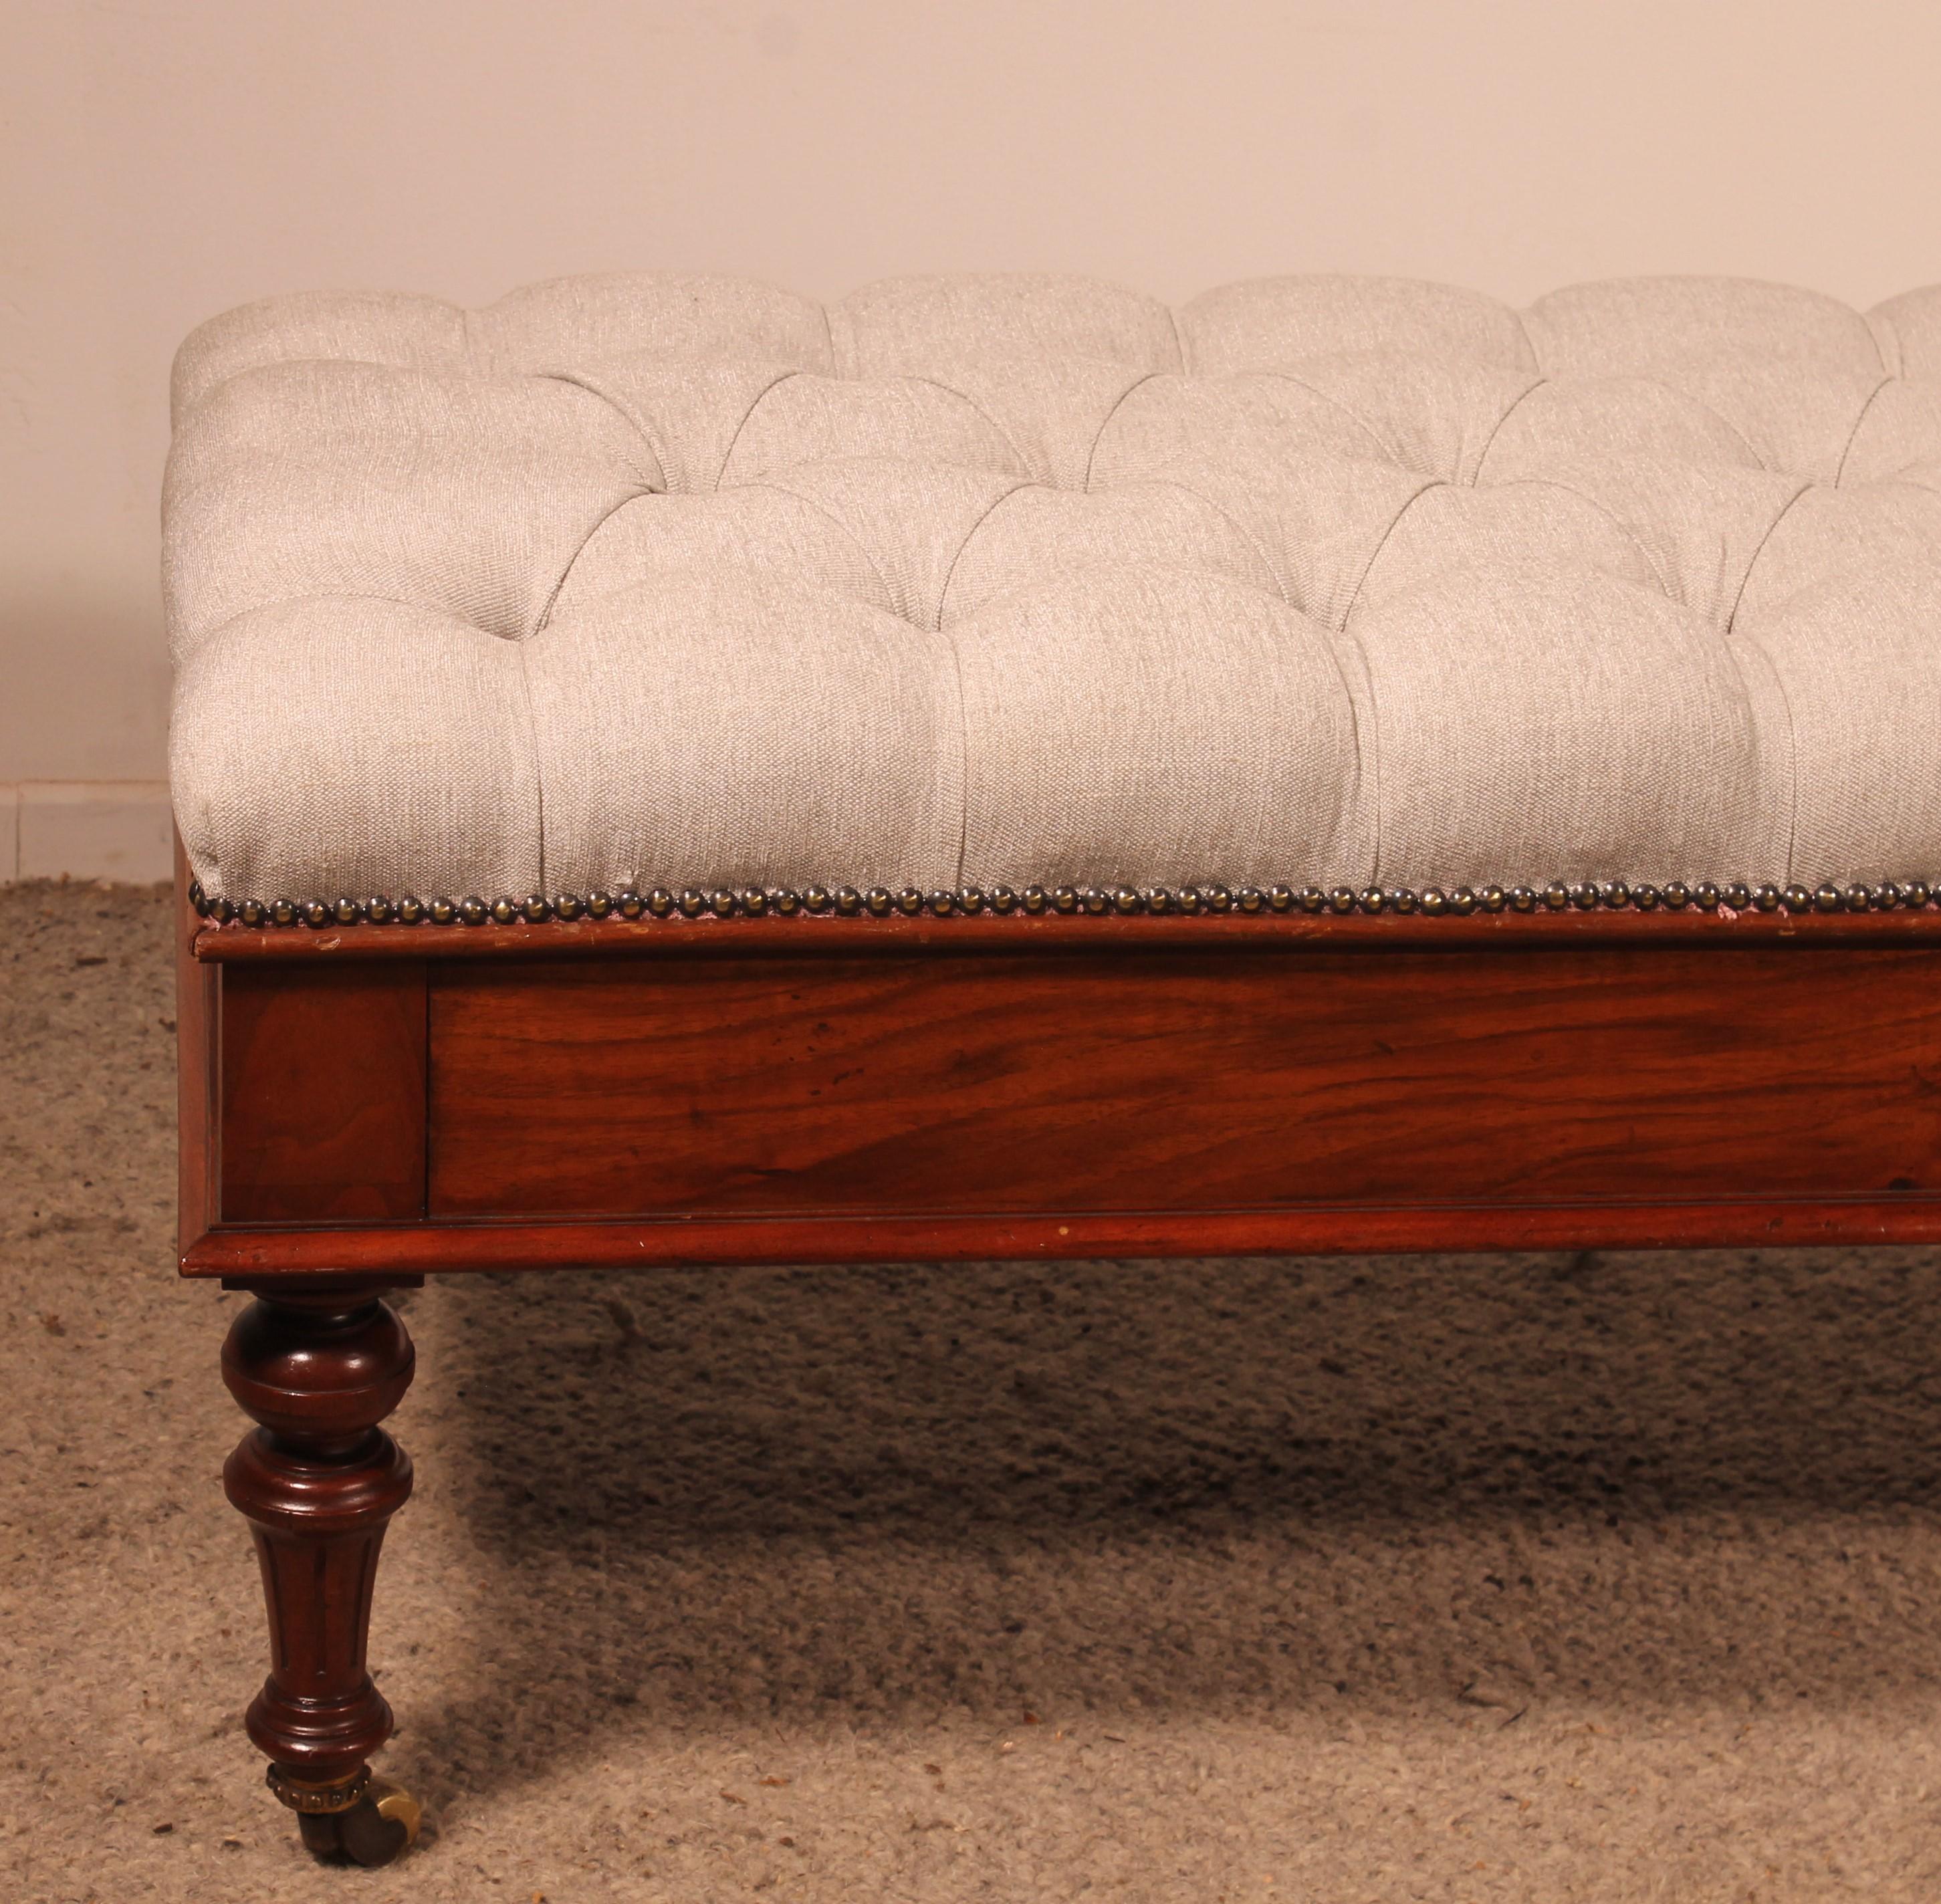 lovely 19th century walnut bench from England covered with a chesterfield style seating

Very beautiful walnut base with a beautiful flame and a beautiful turning ending with casters

The bench has been covered with a pearl gray fabric. The